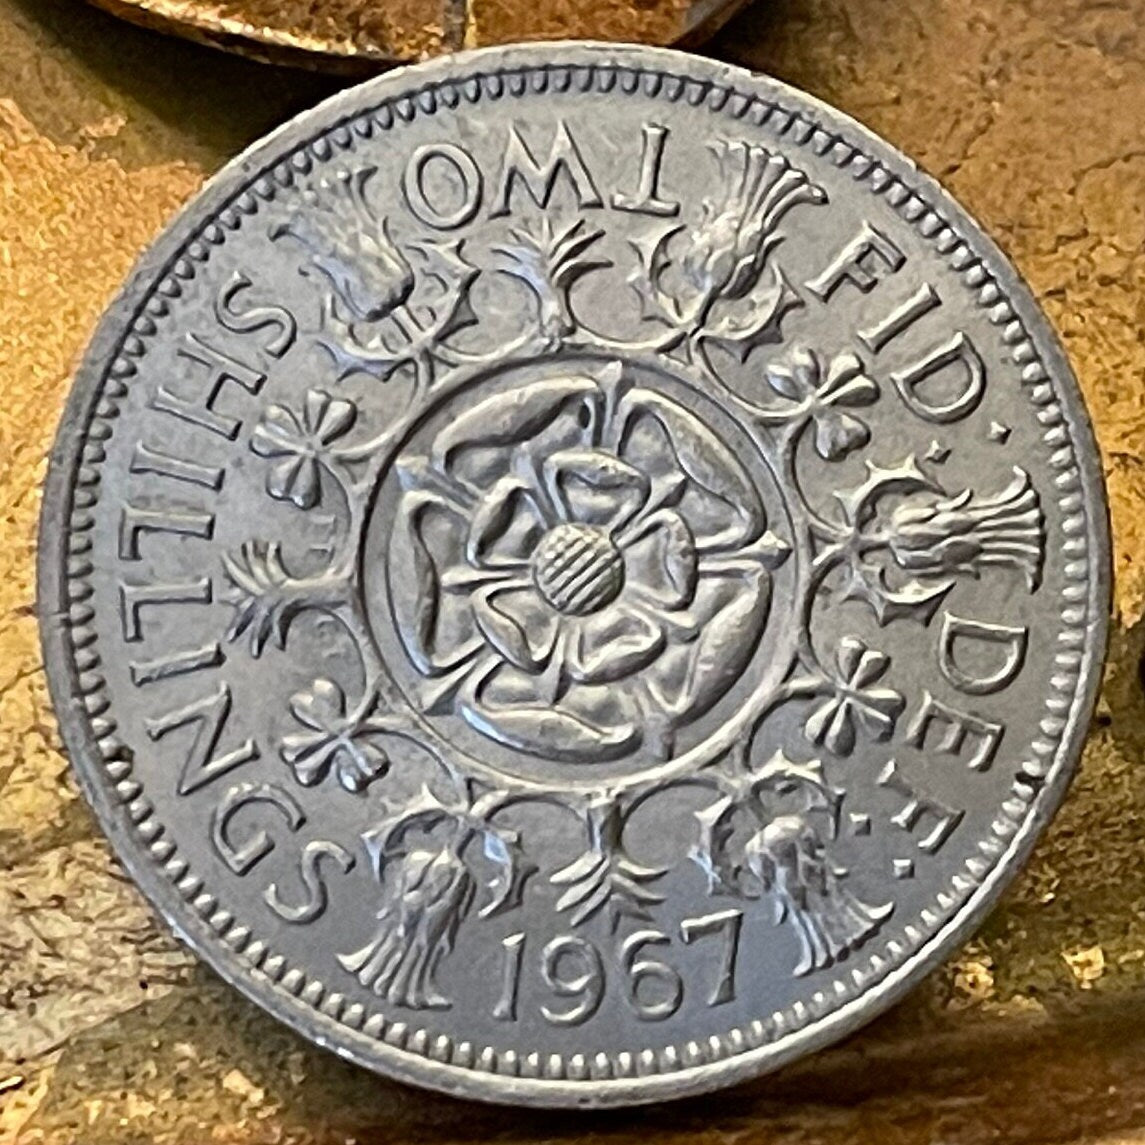 Tudor Rose, Thistle, Shamrock and Leek 1 Florin (2 Shillings) Great Britain Authentic Coin Money for Jewelry and Crafts (Queen Elizabeth)